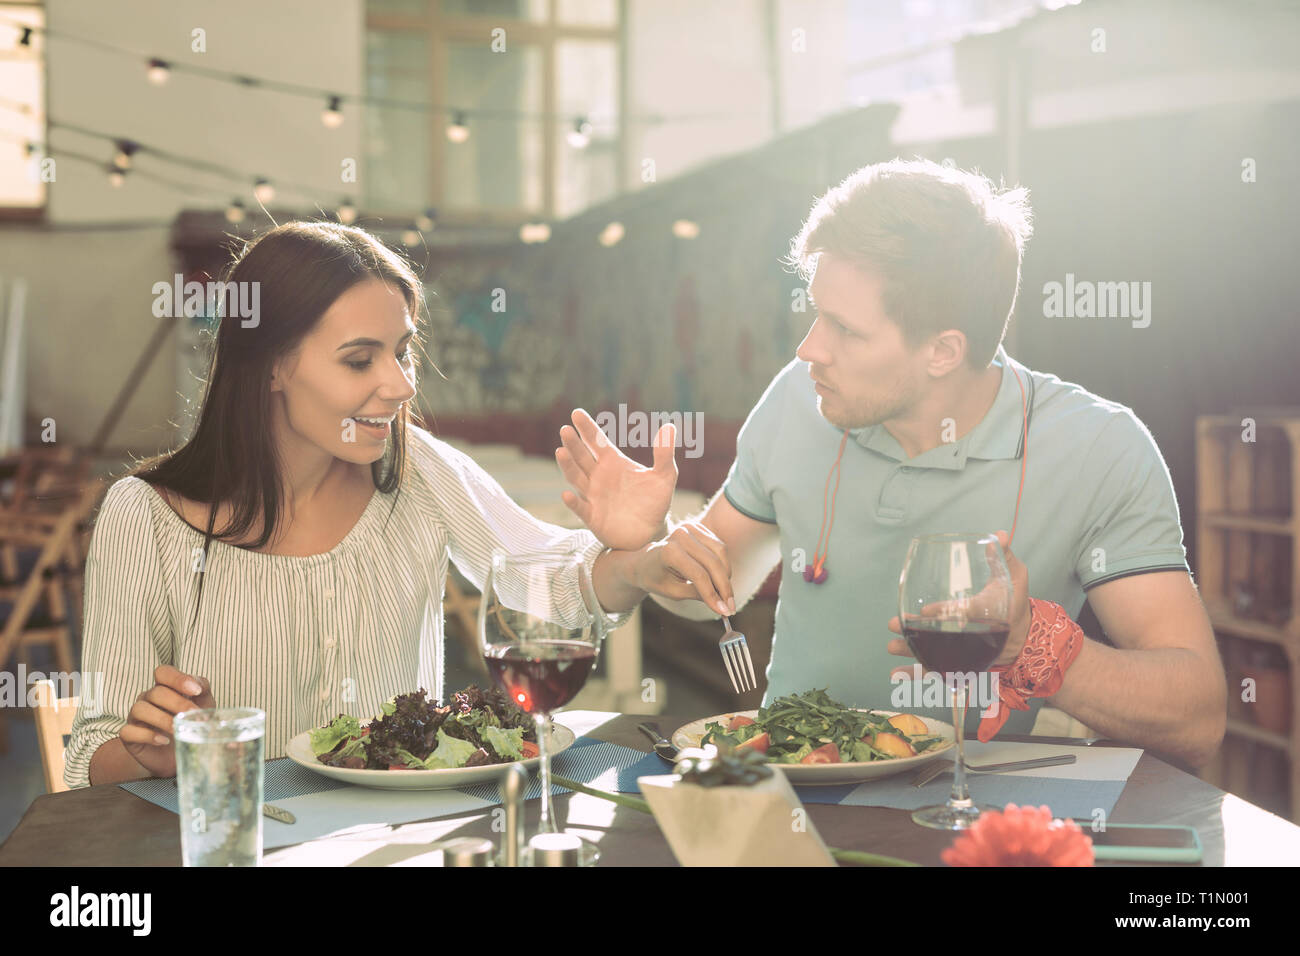 Shameless long-haired girl stealing pieces of salad from plate Stock Photo